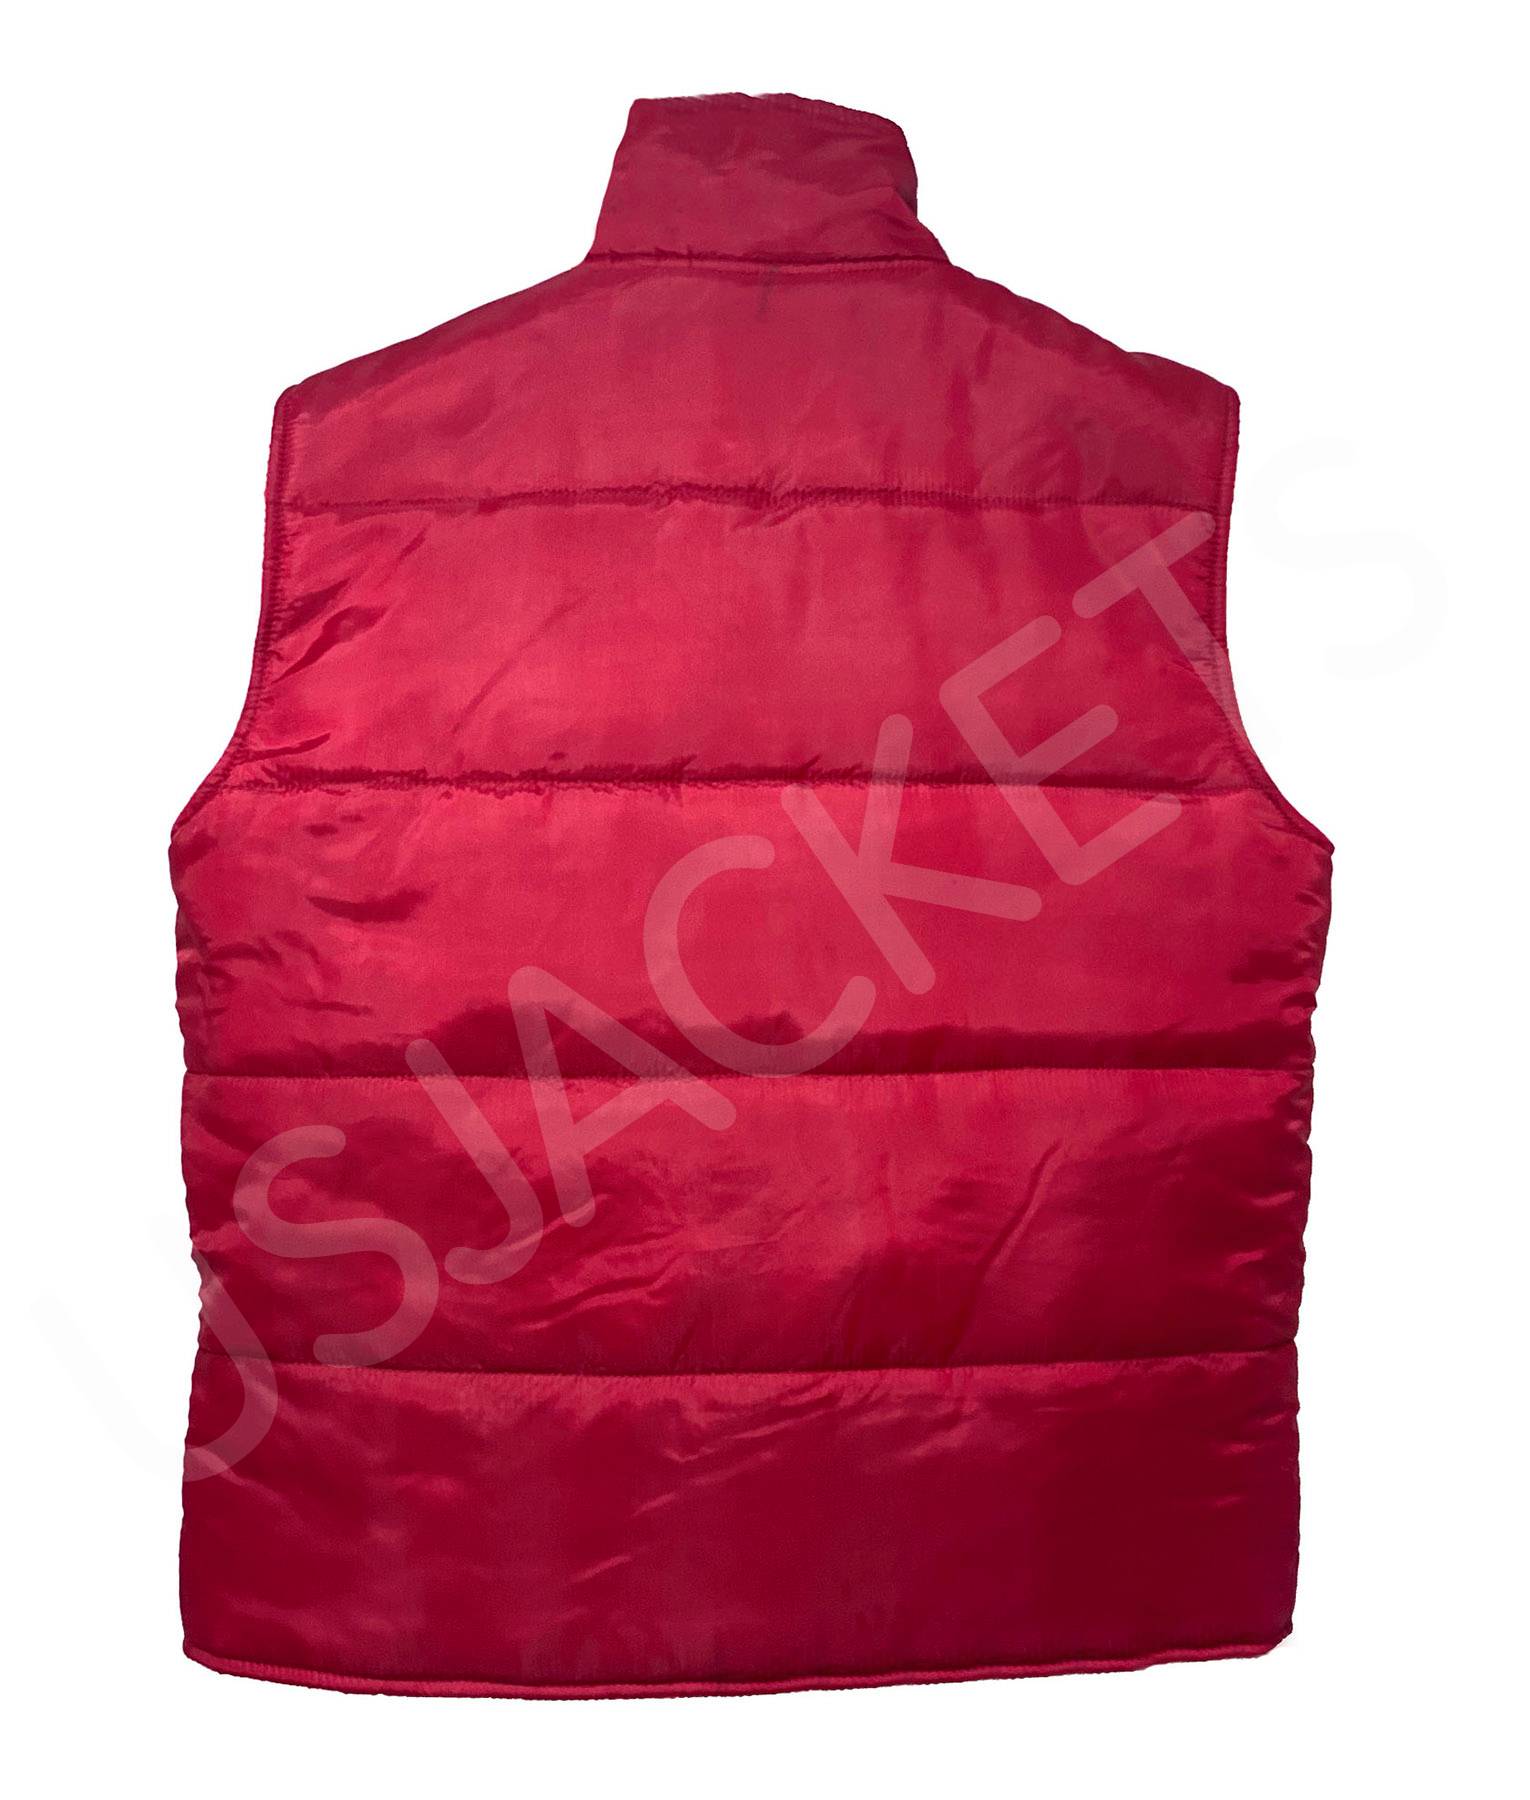 Back To The Future Marty Mcfly Red Vest 2